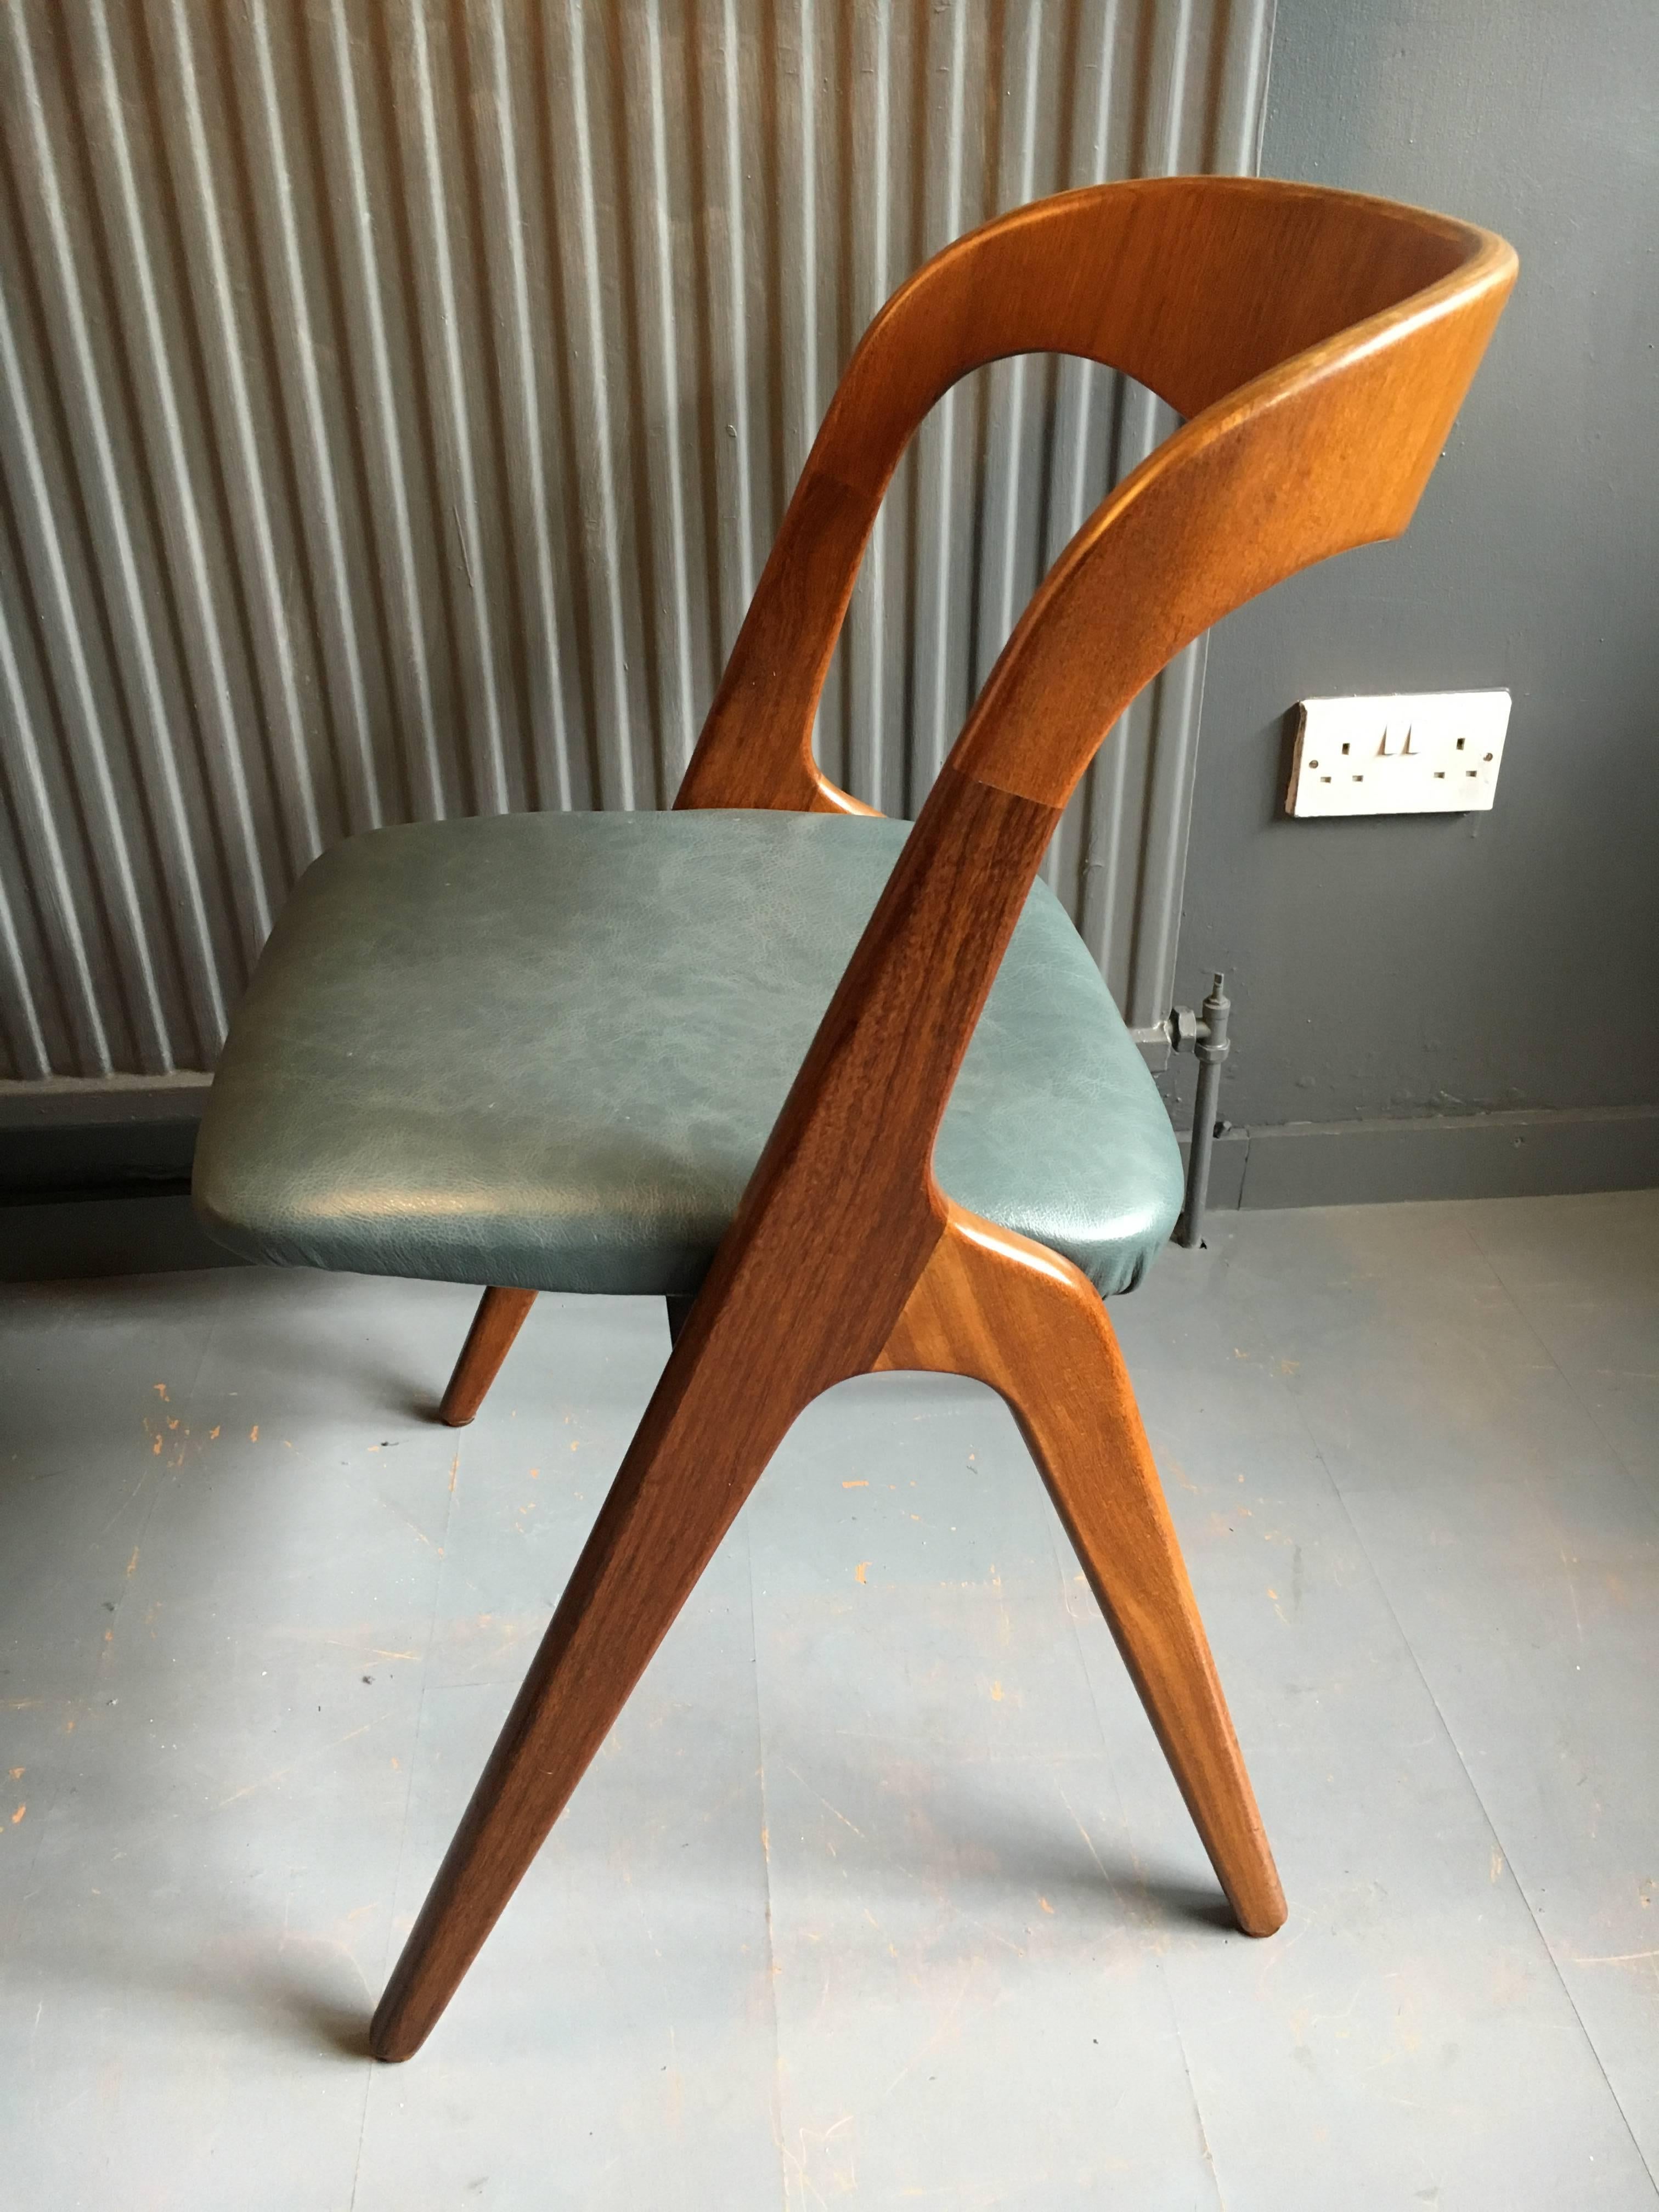 Six Danish Mid-Century dining chairs by Vamo Sonderborg. Teak, circa 1960.
Newly upholstered in crest leather. Other upholstery options are available.